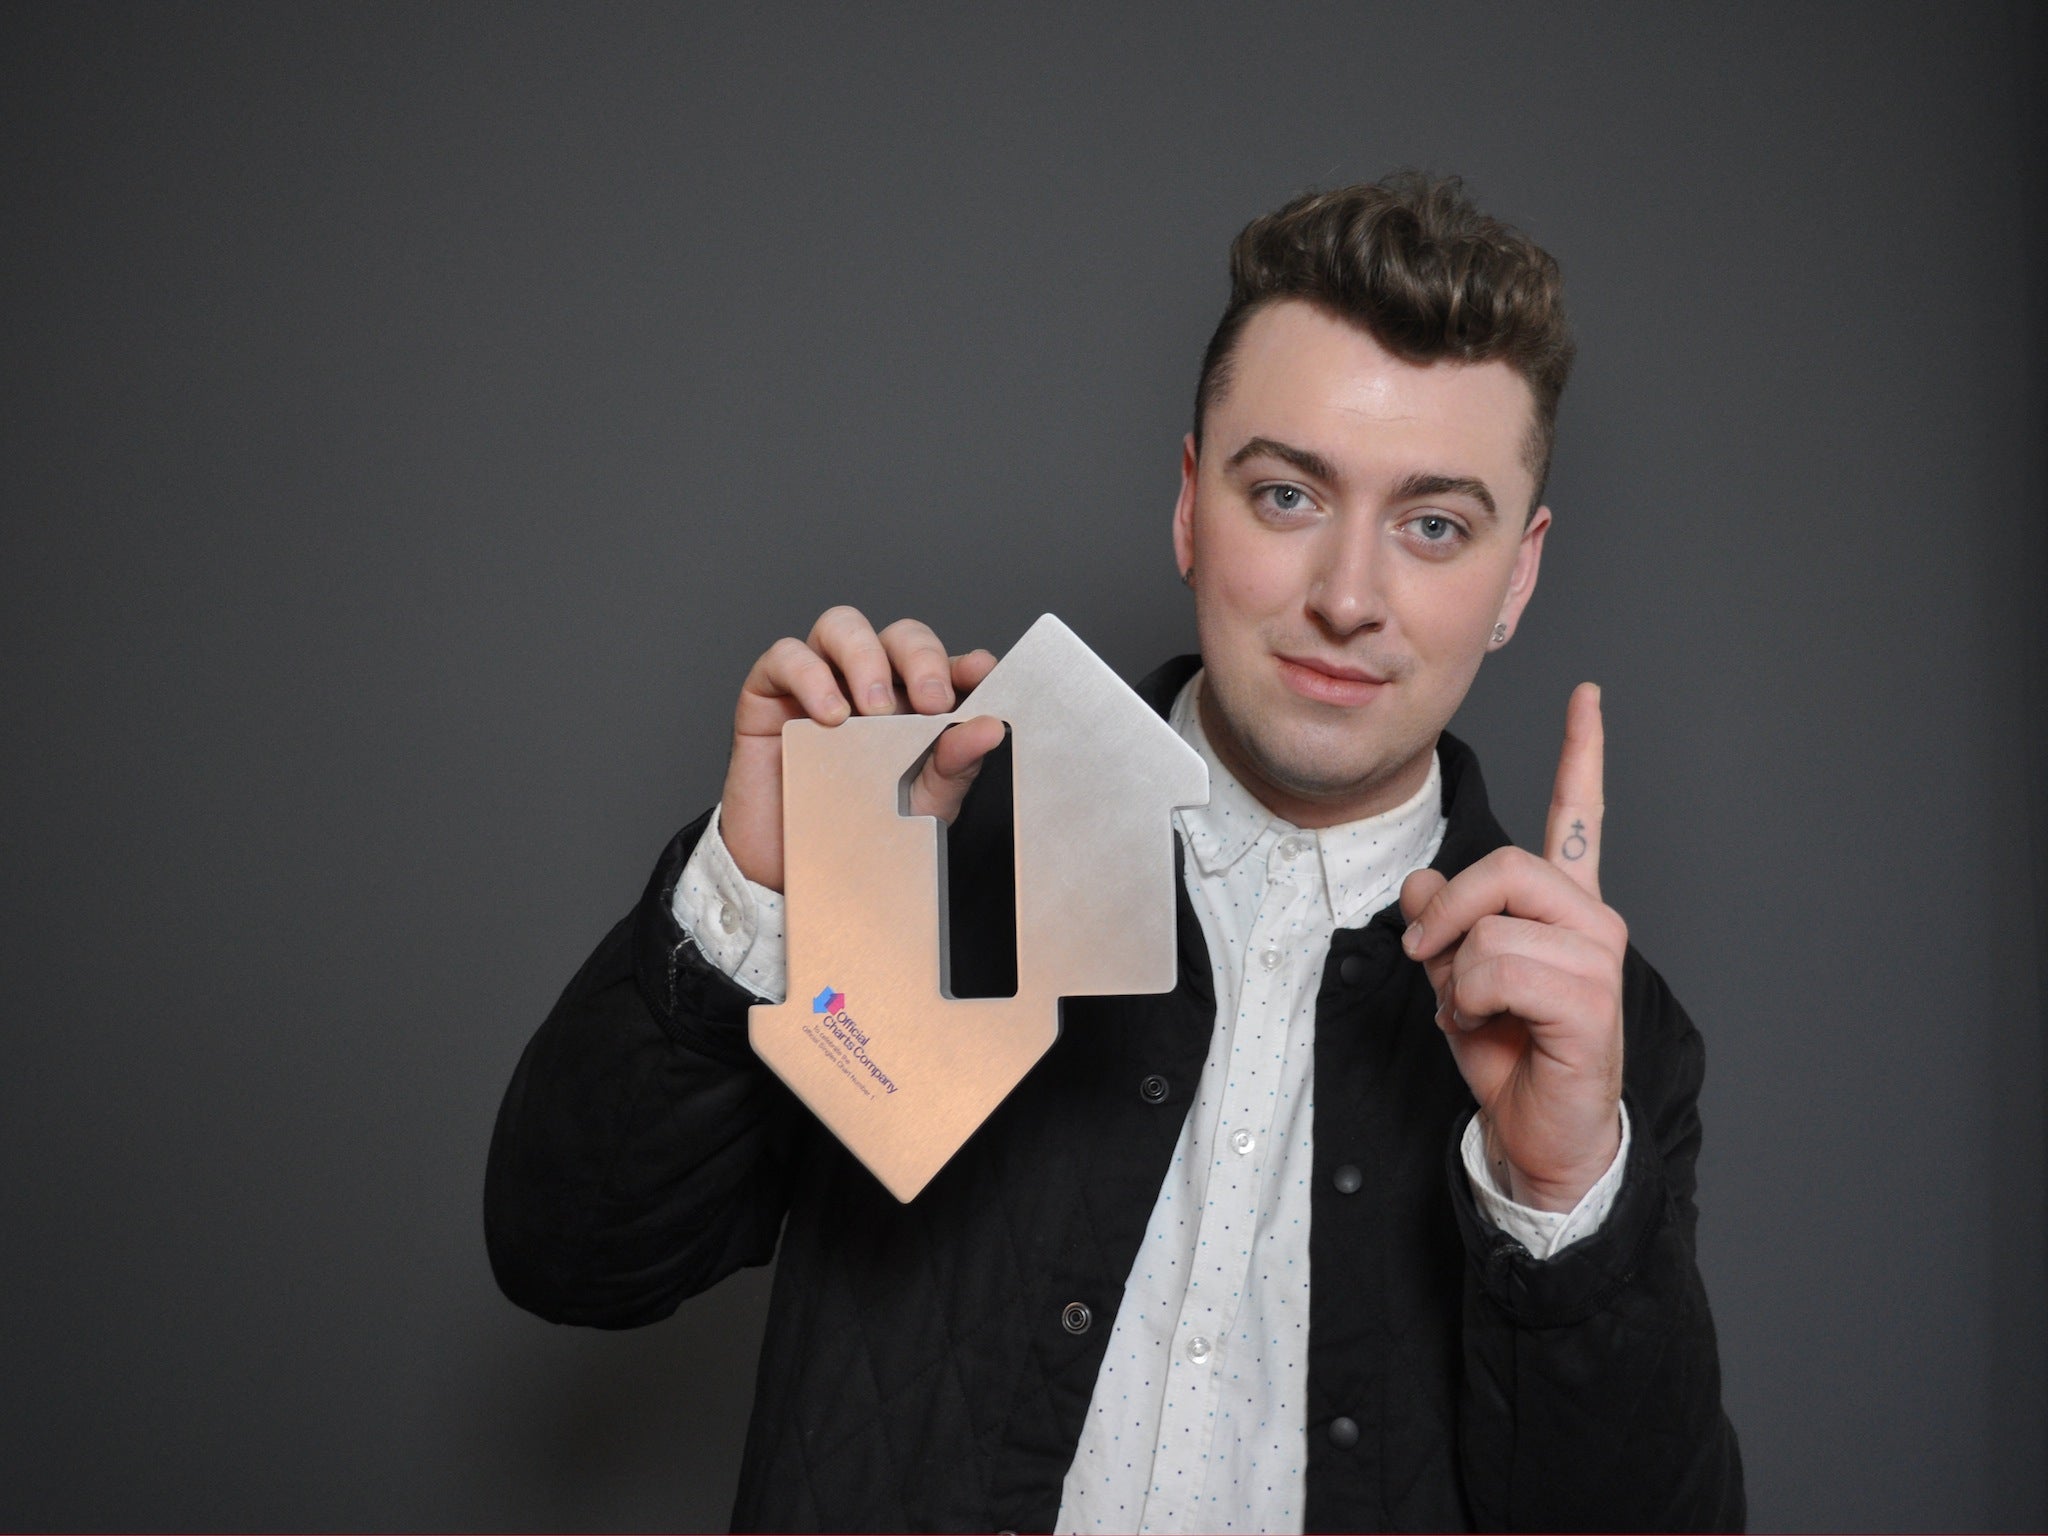 Sam Smith's In The Lonely Hour has entered the UK Official Albums Chart at number one, toppling Coldplay's Ghost Stories